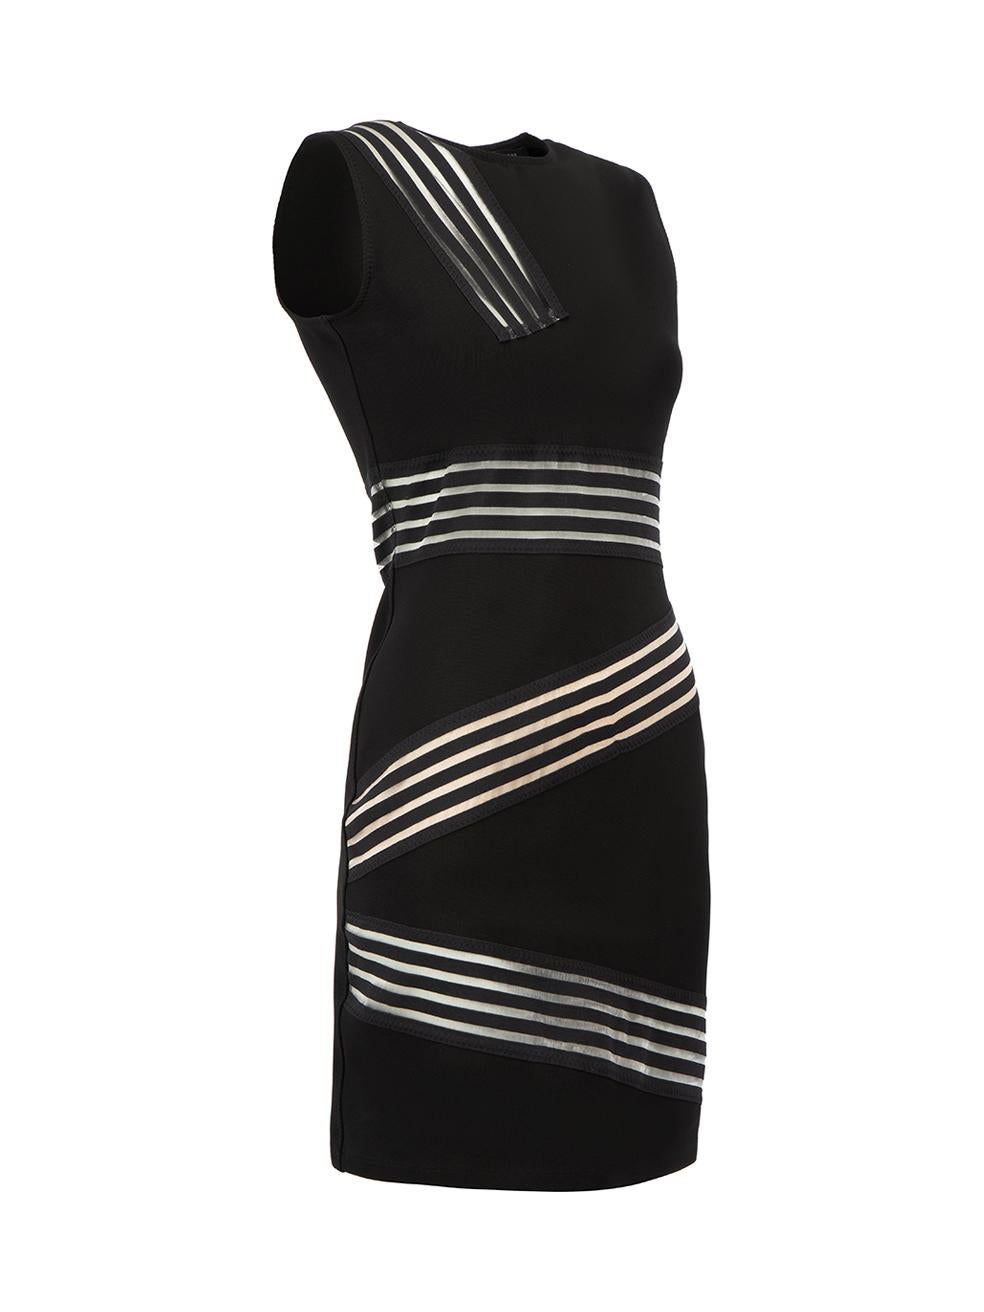 CONDITION is Very good. Minimal wear to dress is evident. Minimal wear to the elastic trim with pulls to the threading on this used Christopher Kane designer resale item.



Details


Black

Viscose

Body-con mini dress

Sleeveless

Round